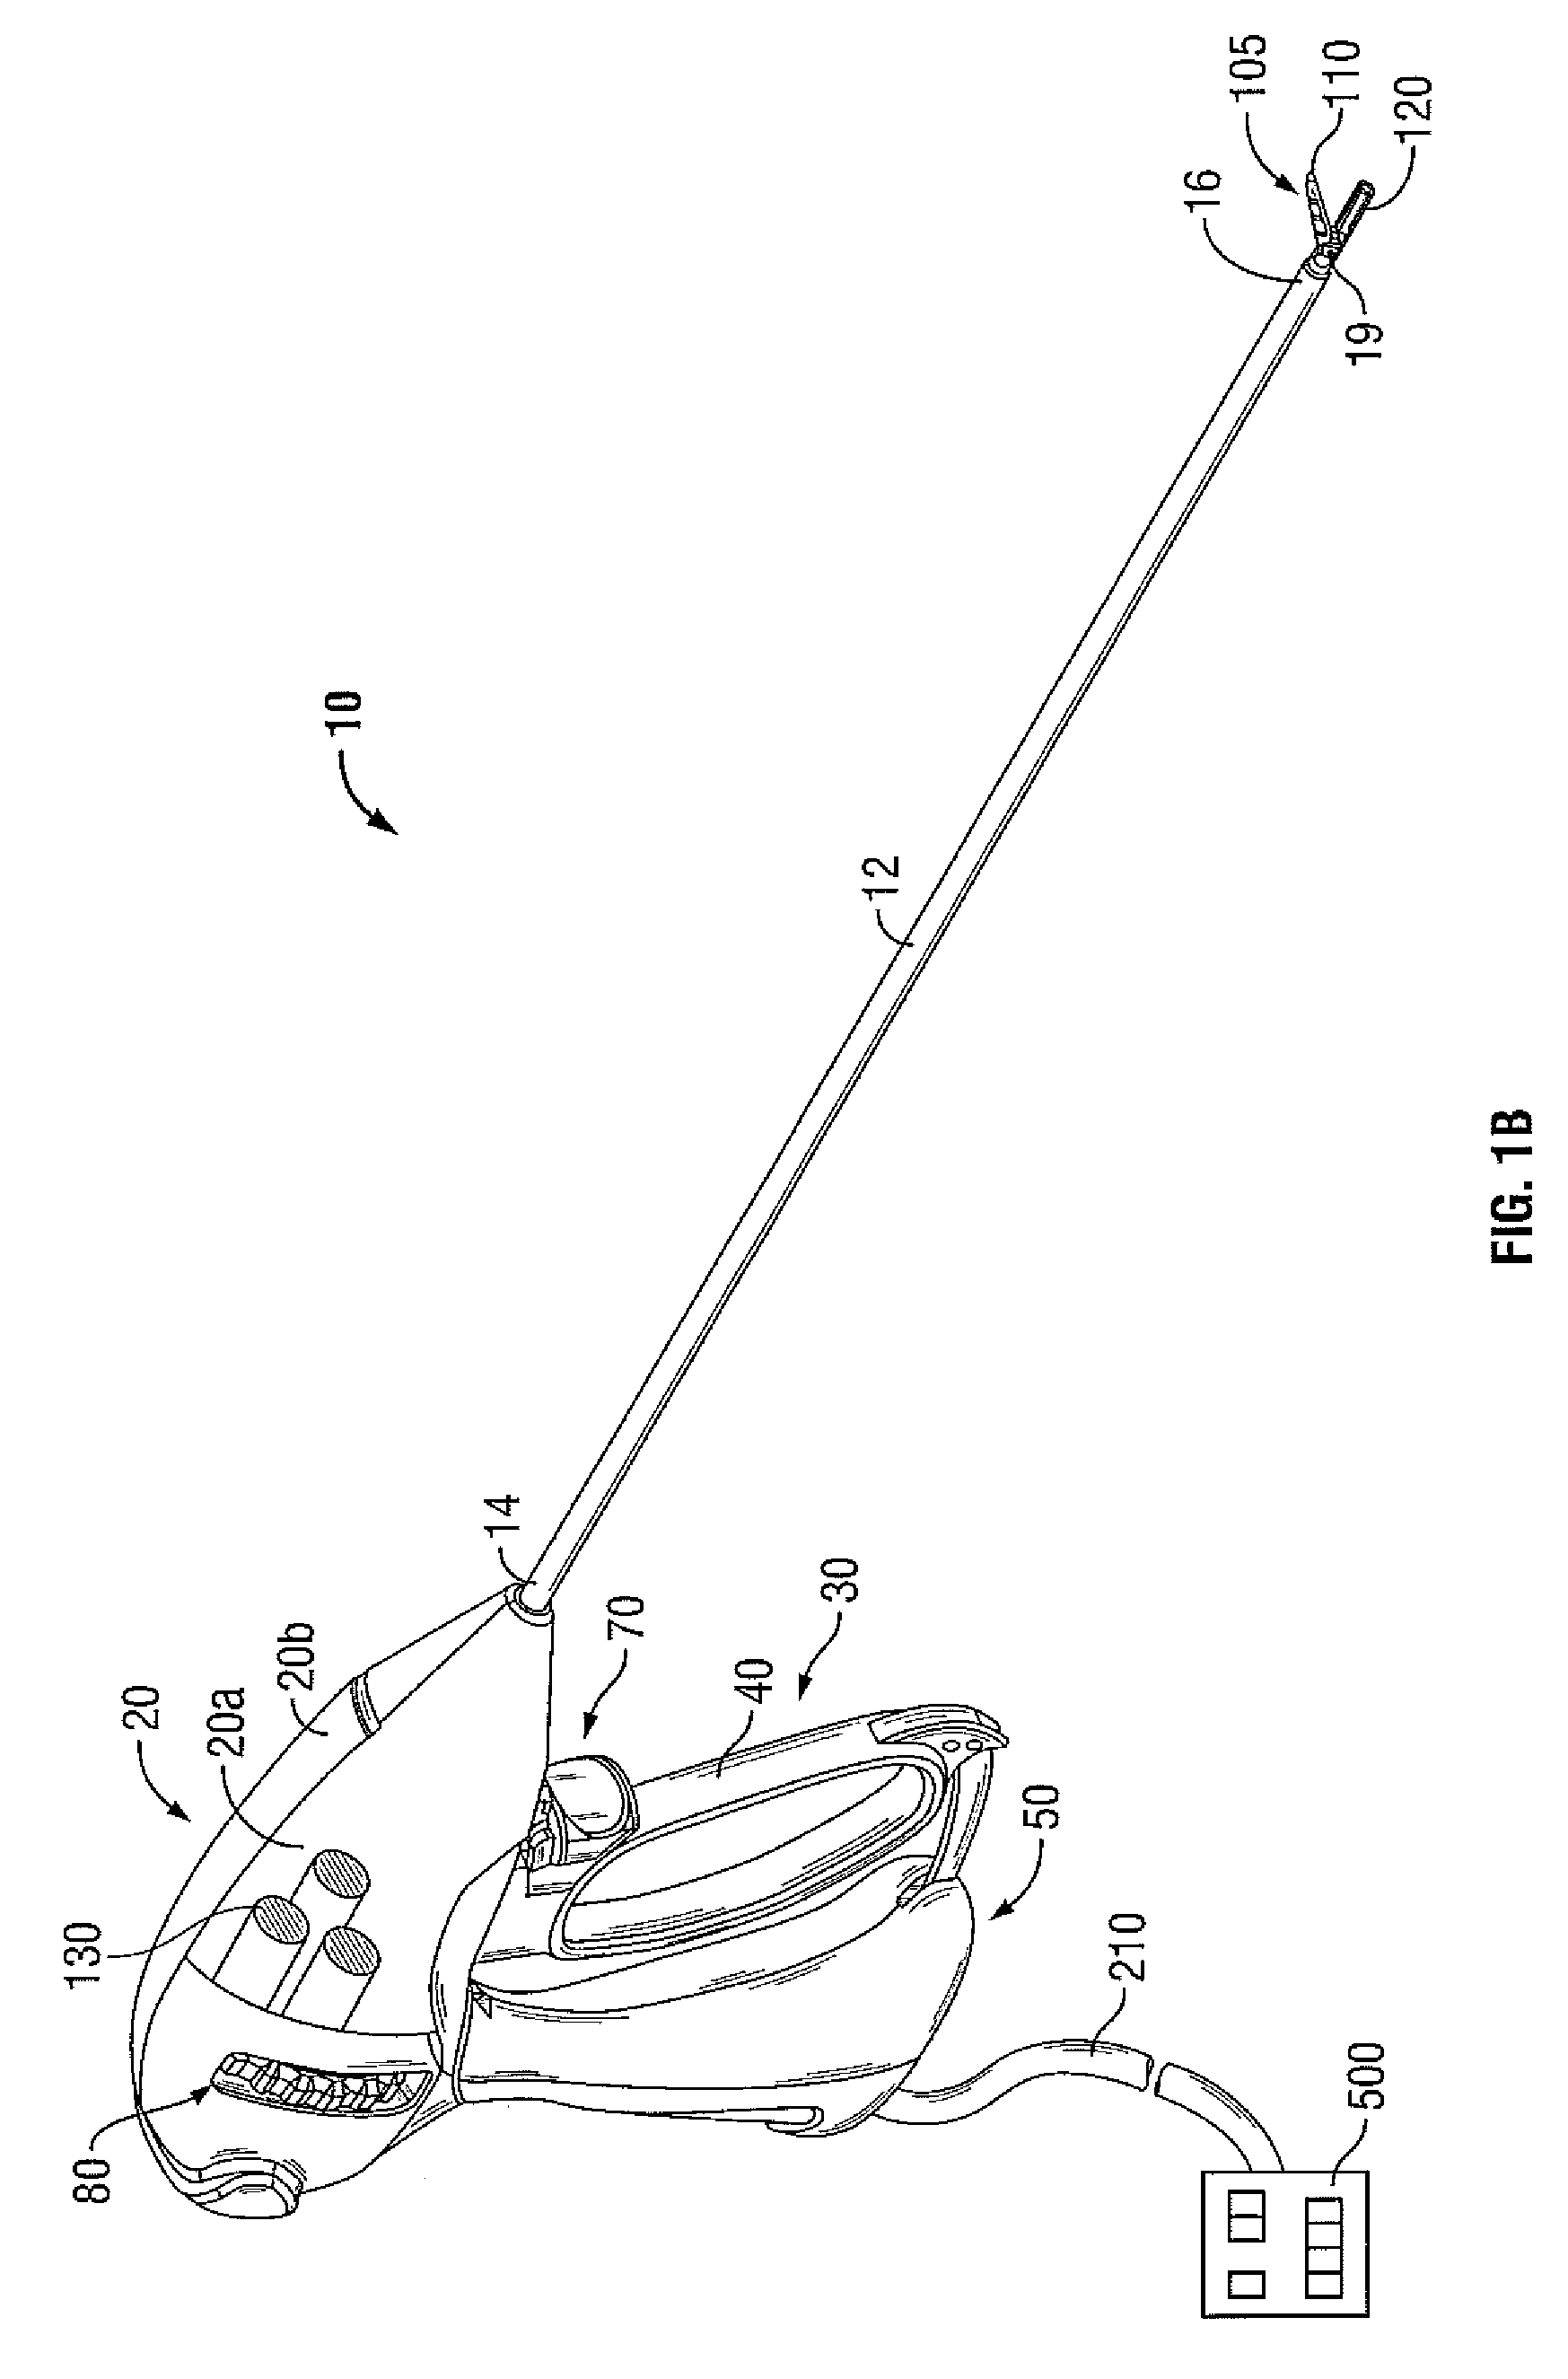 Ultrasound device for precise tissue sealing and blade-less cutting